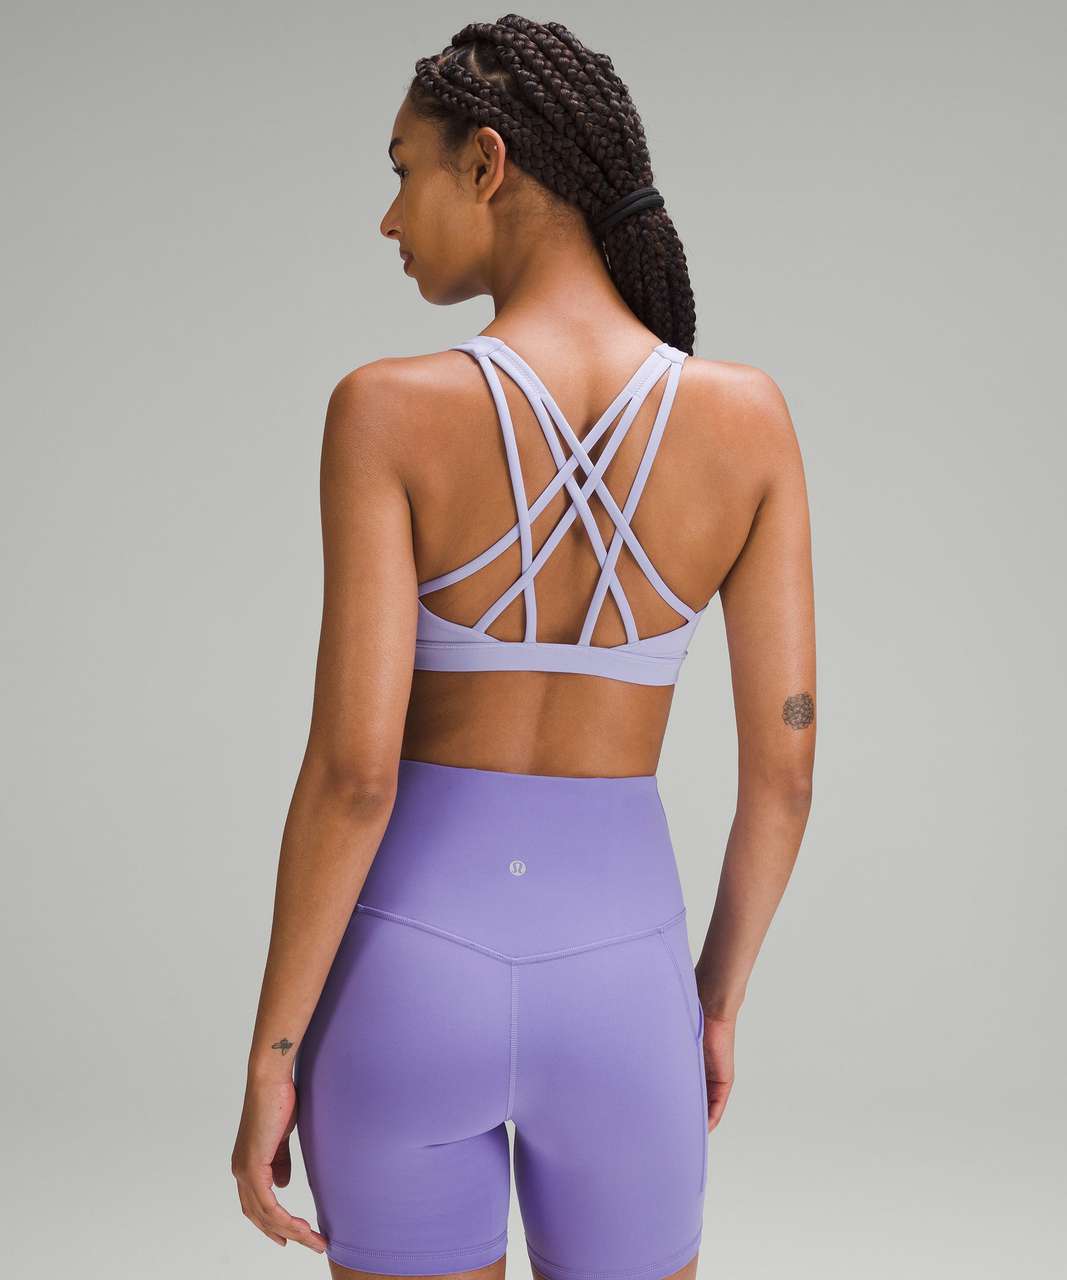 Lululemon Free to Be Serene Bra *Light Support, C/D Cup - Lilac Smoke